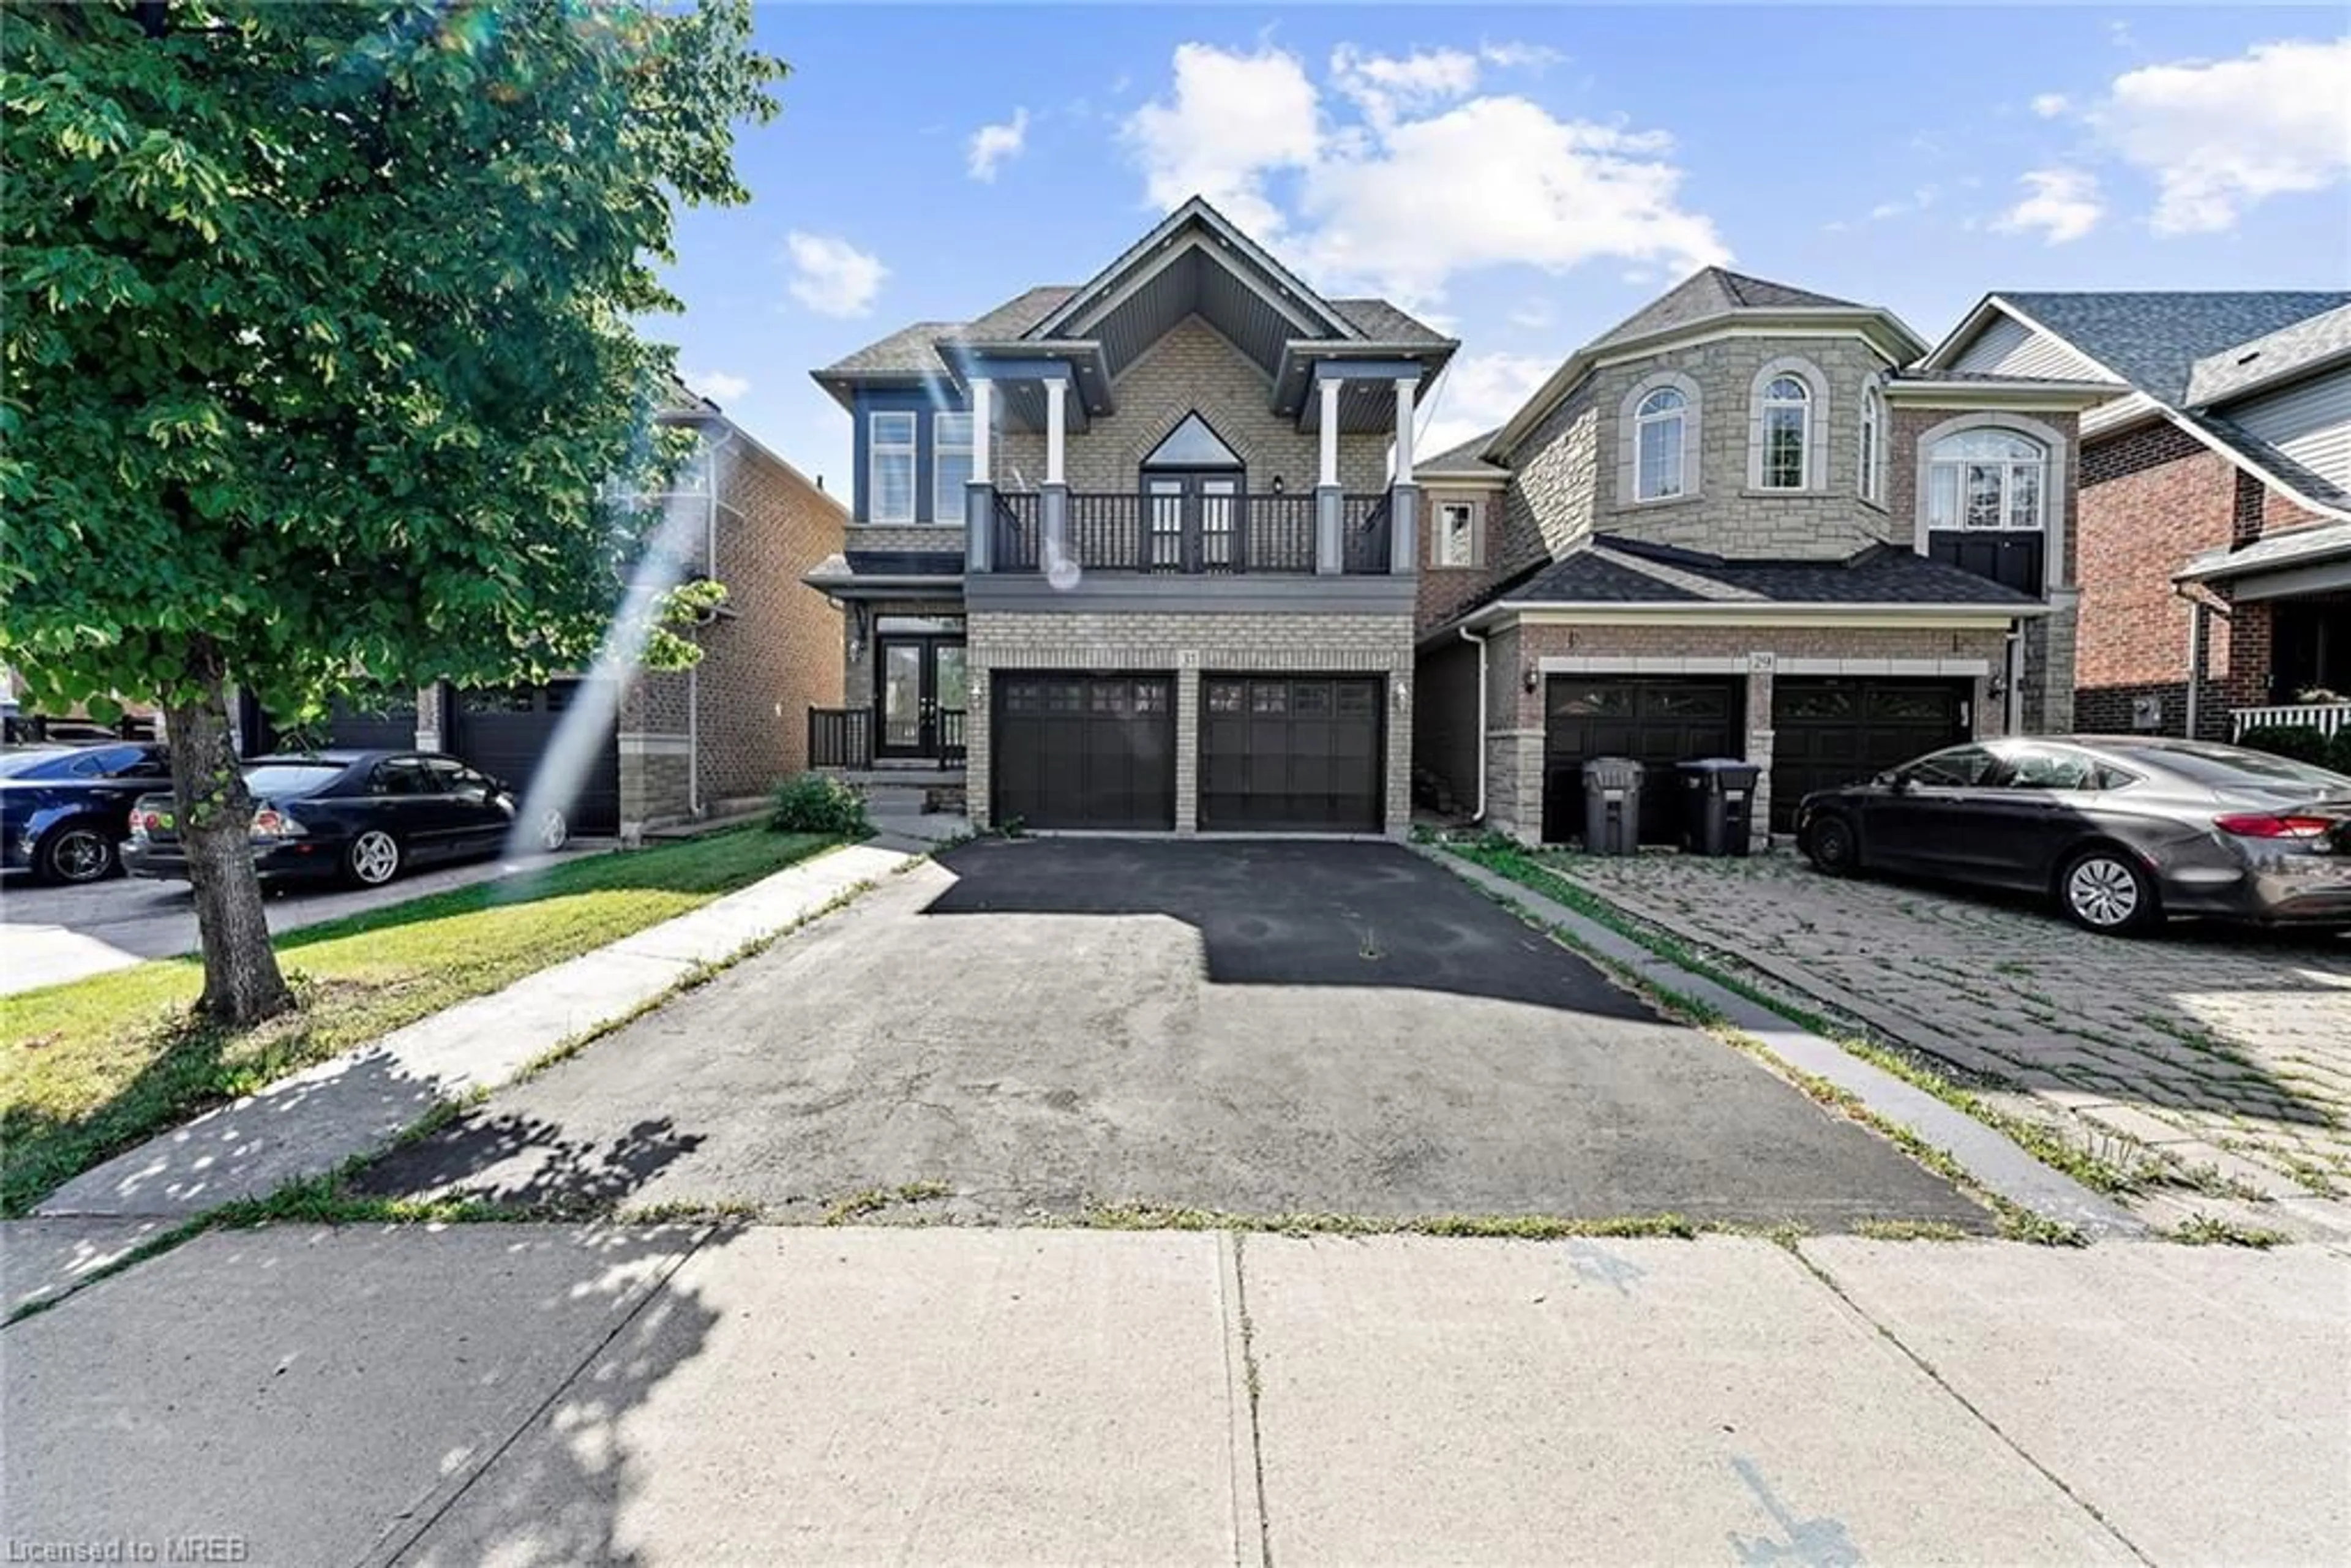 Frontside or backside of a home for 31 Blue Diamond Dr, Brampton Ontario L6S 6J2